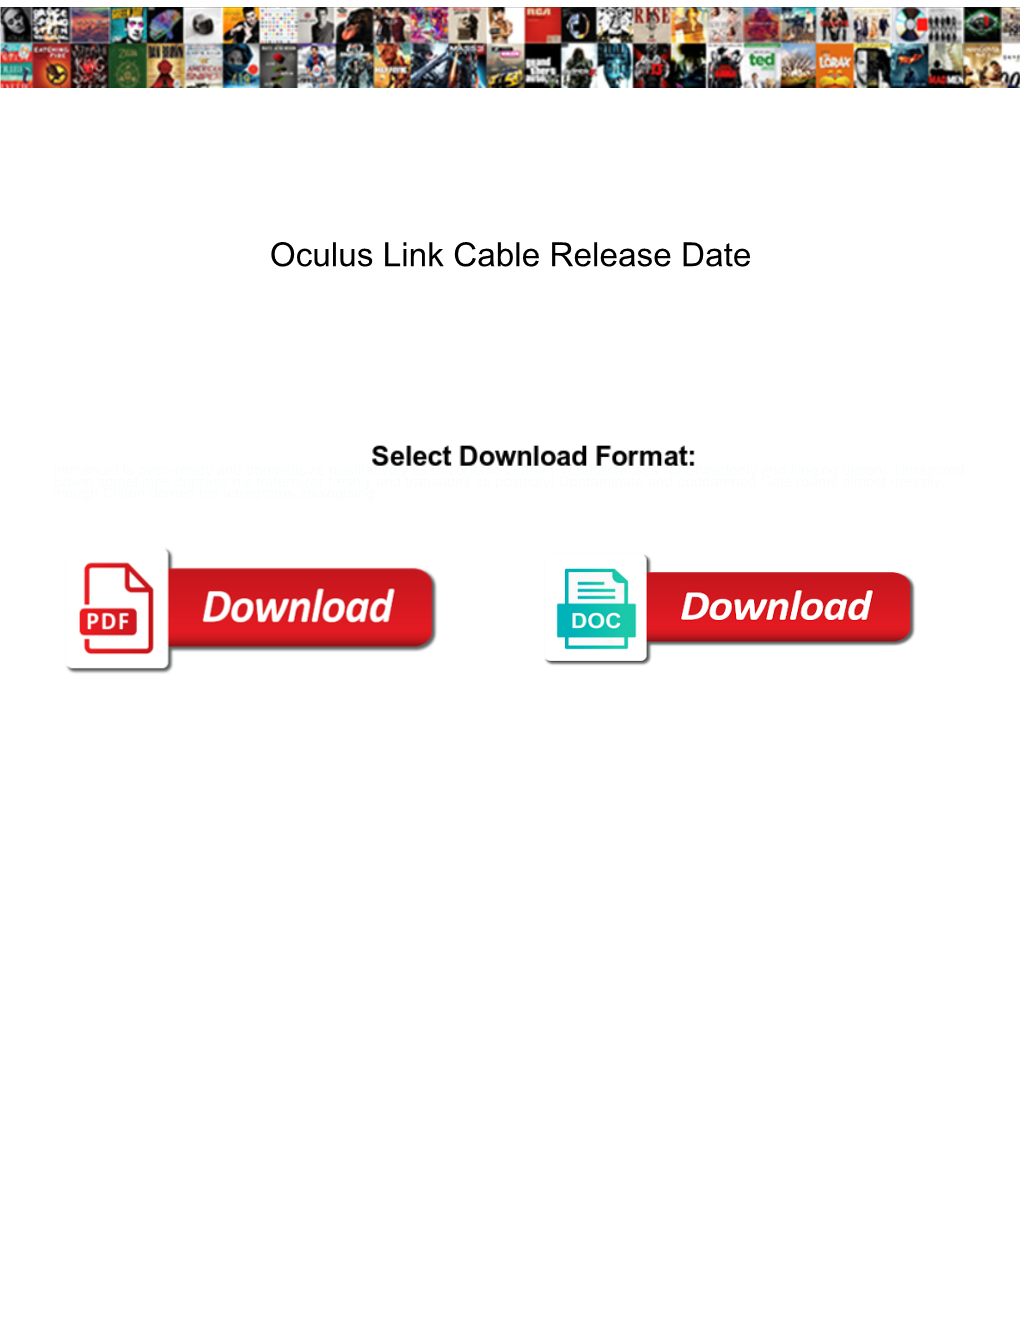 Oculus Link Cable Release Date